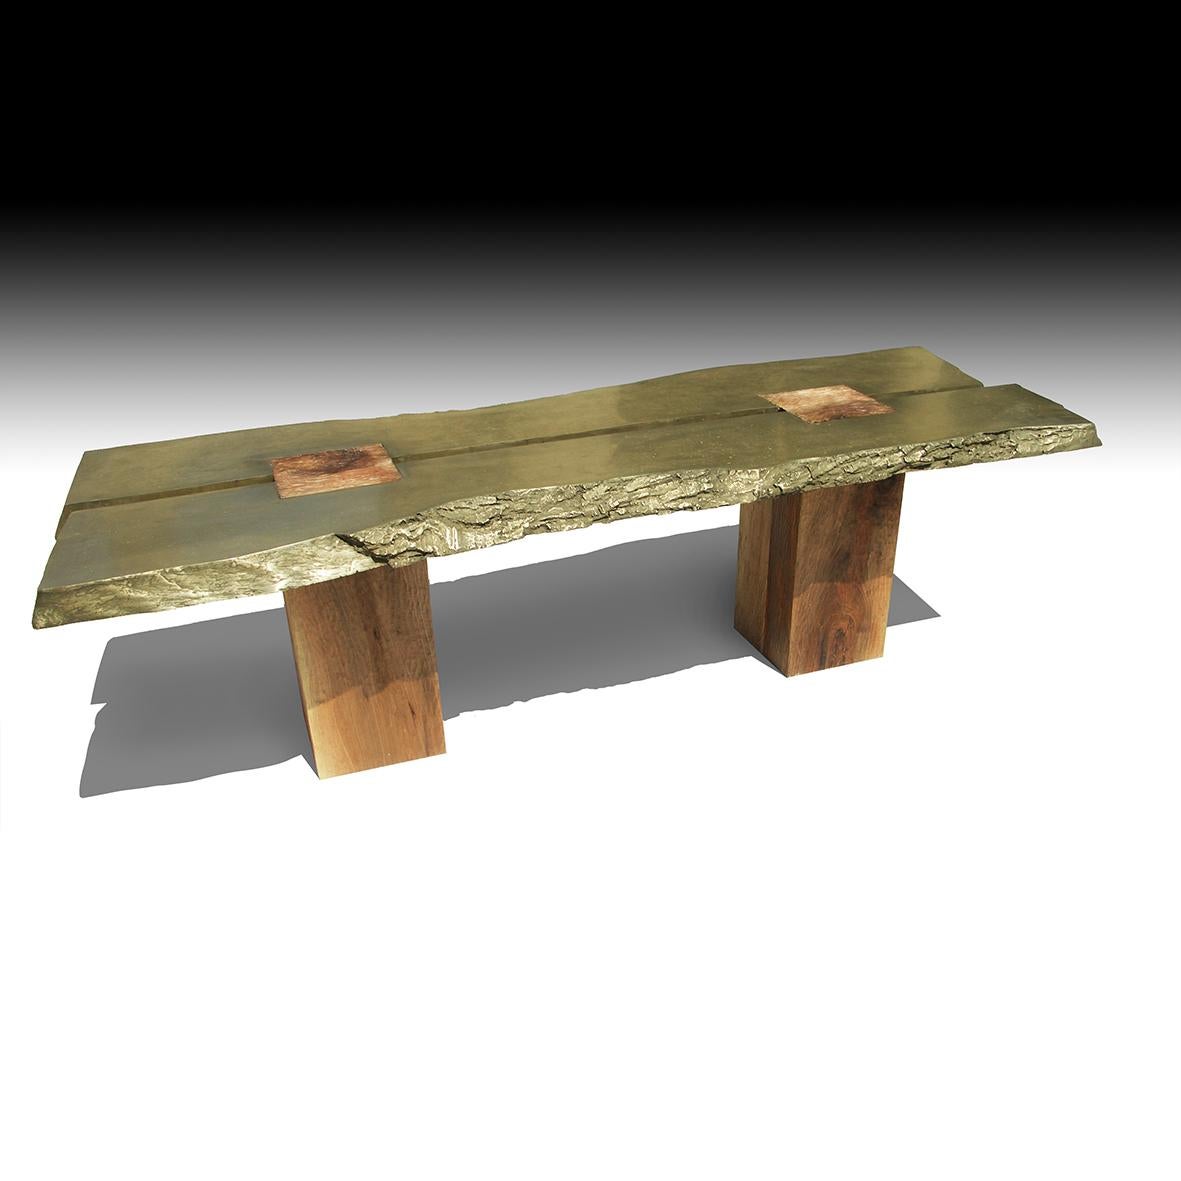 This dining table draws its aesthetic from the parallelism of its two solids 
wood plunk cast in brass and resting on hand-carved wooden walnut bases. 
It combines modernism and classicism in a sculpture with an unmissable appeal.

This dining table